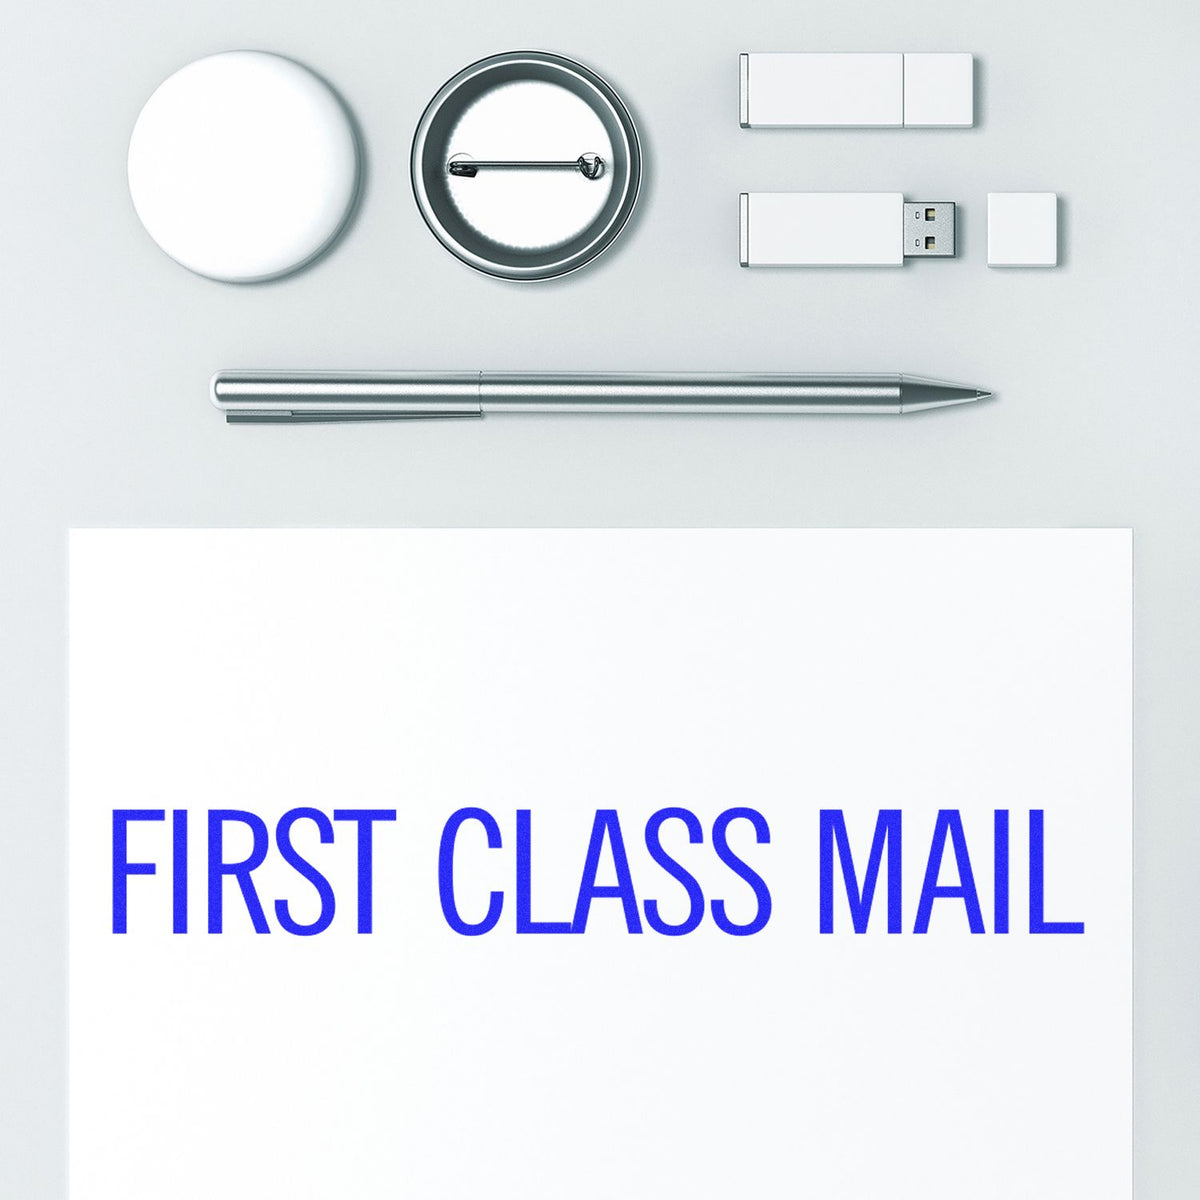 Large Self-Inking Narrow First Class Mail Stamp In Use Photo